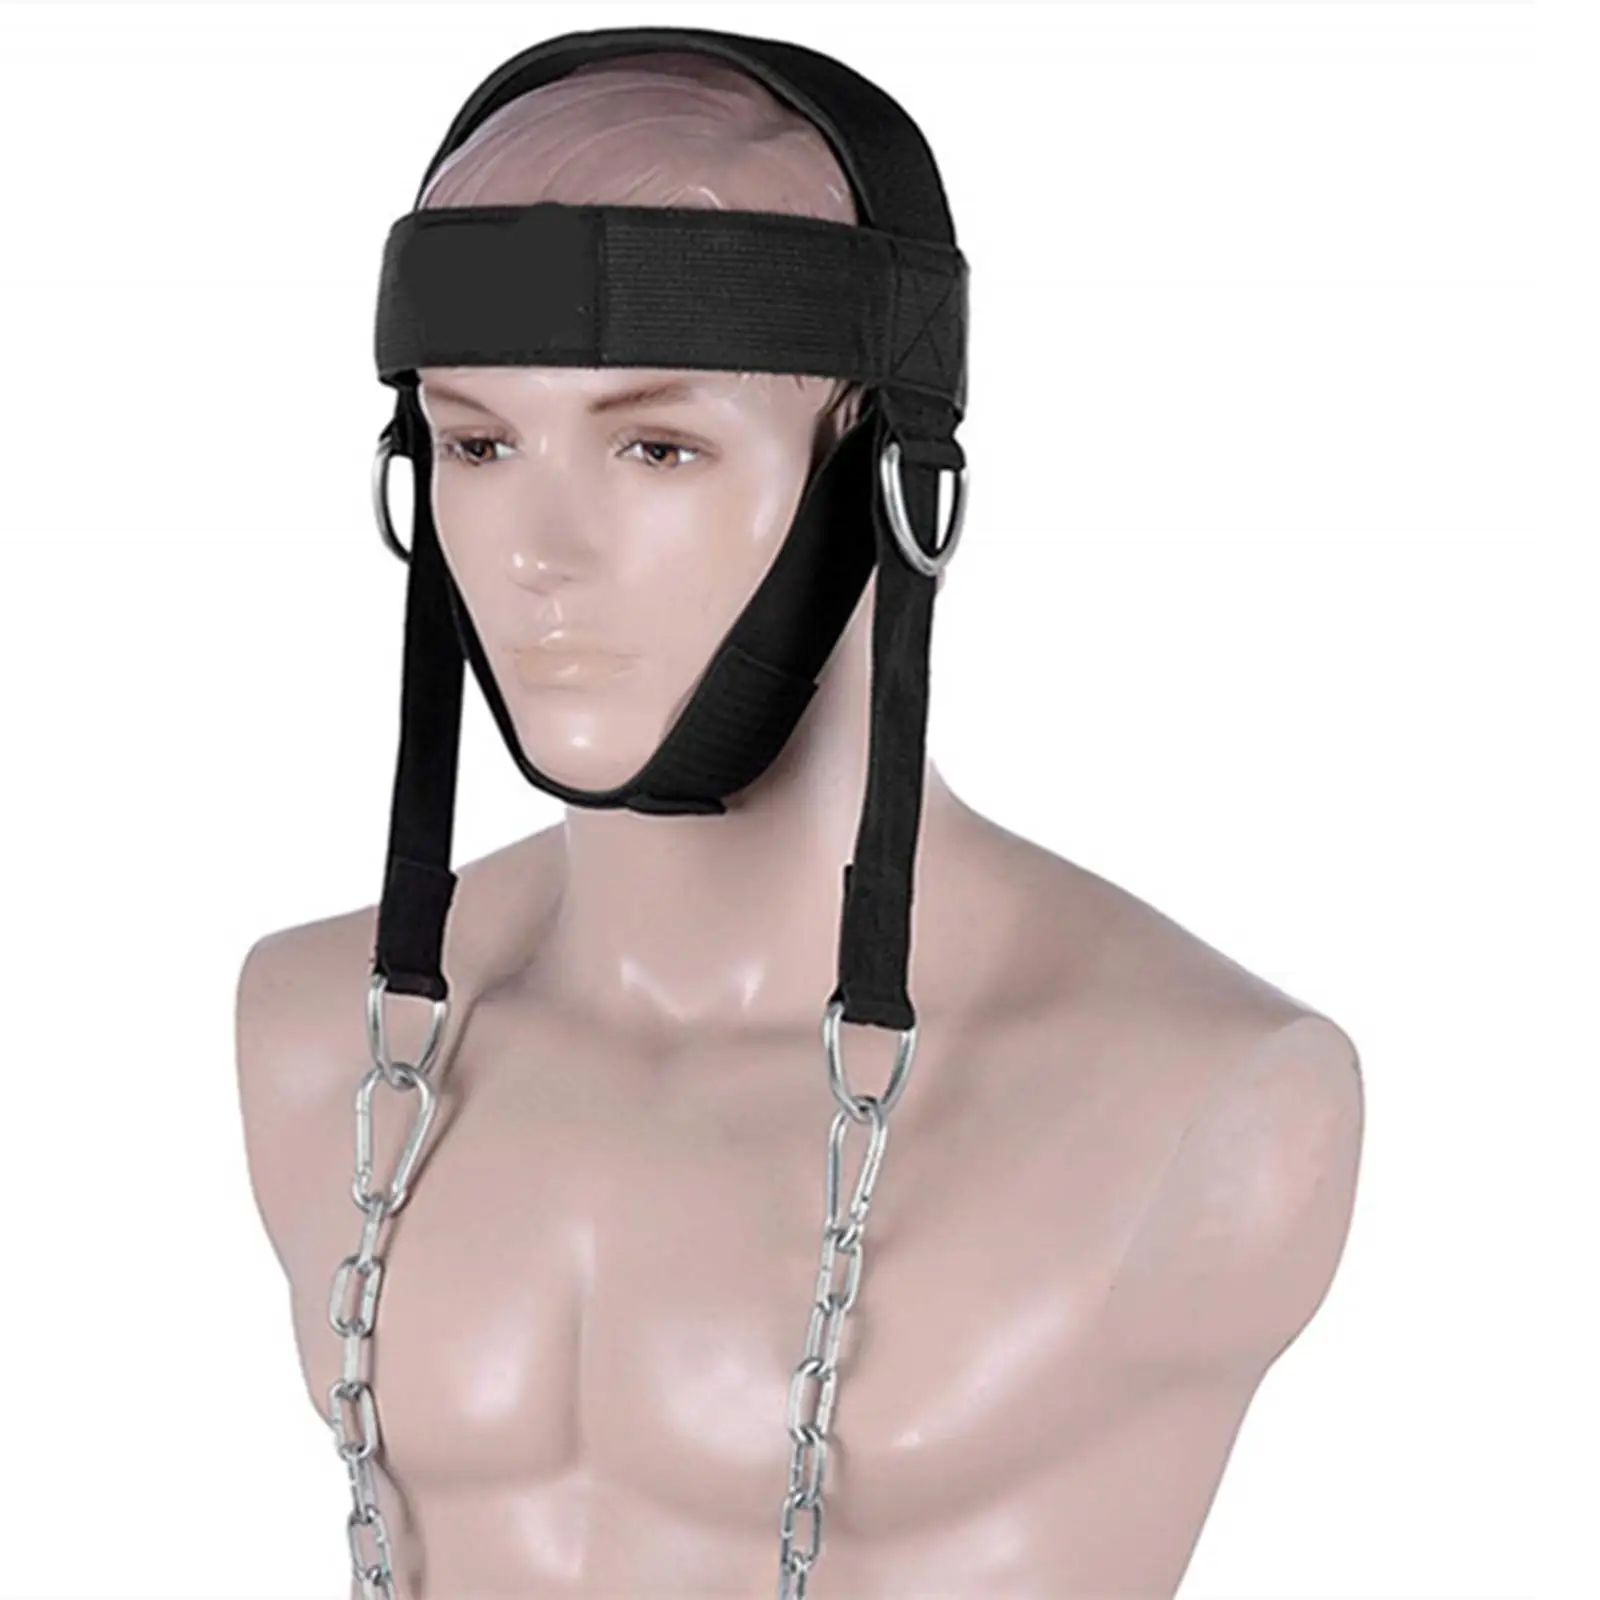 Head Neck Harness Equipment Black Durable Support for Weight Lifting Sports